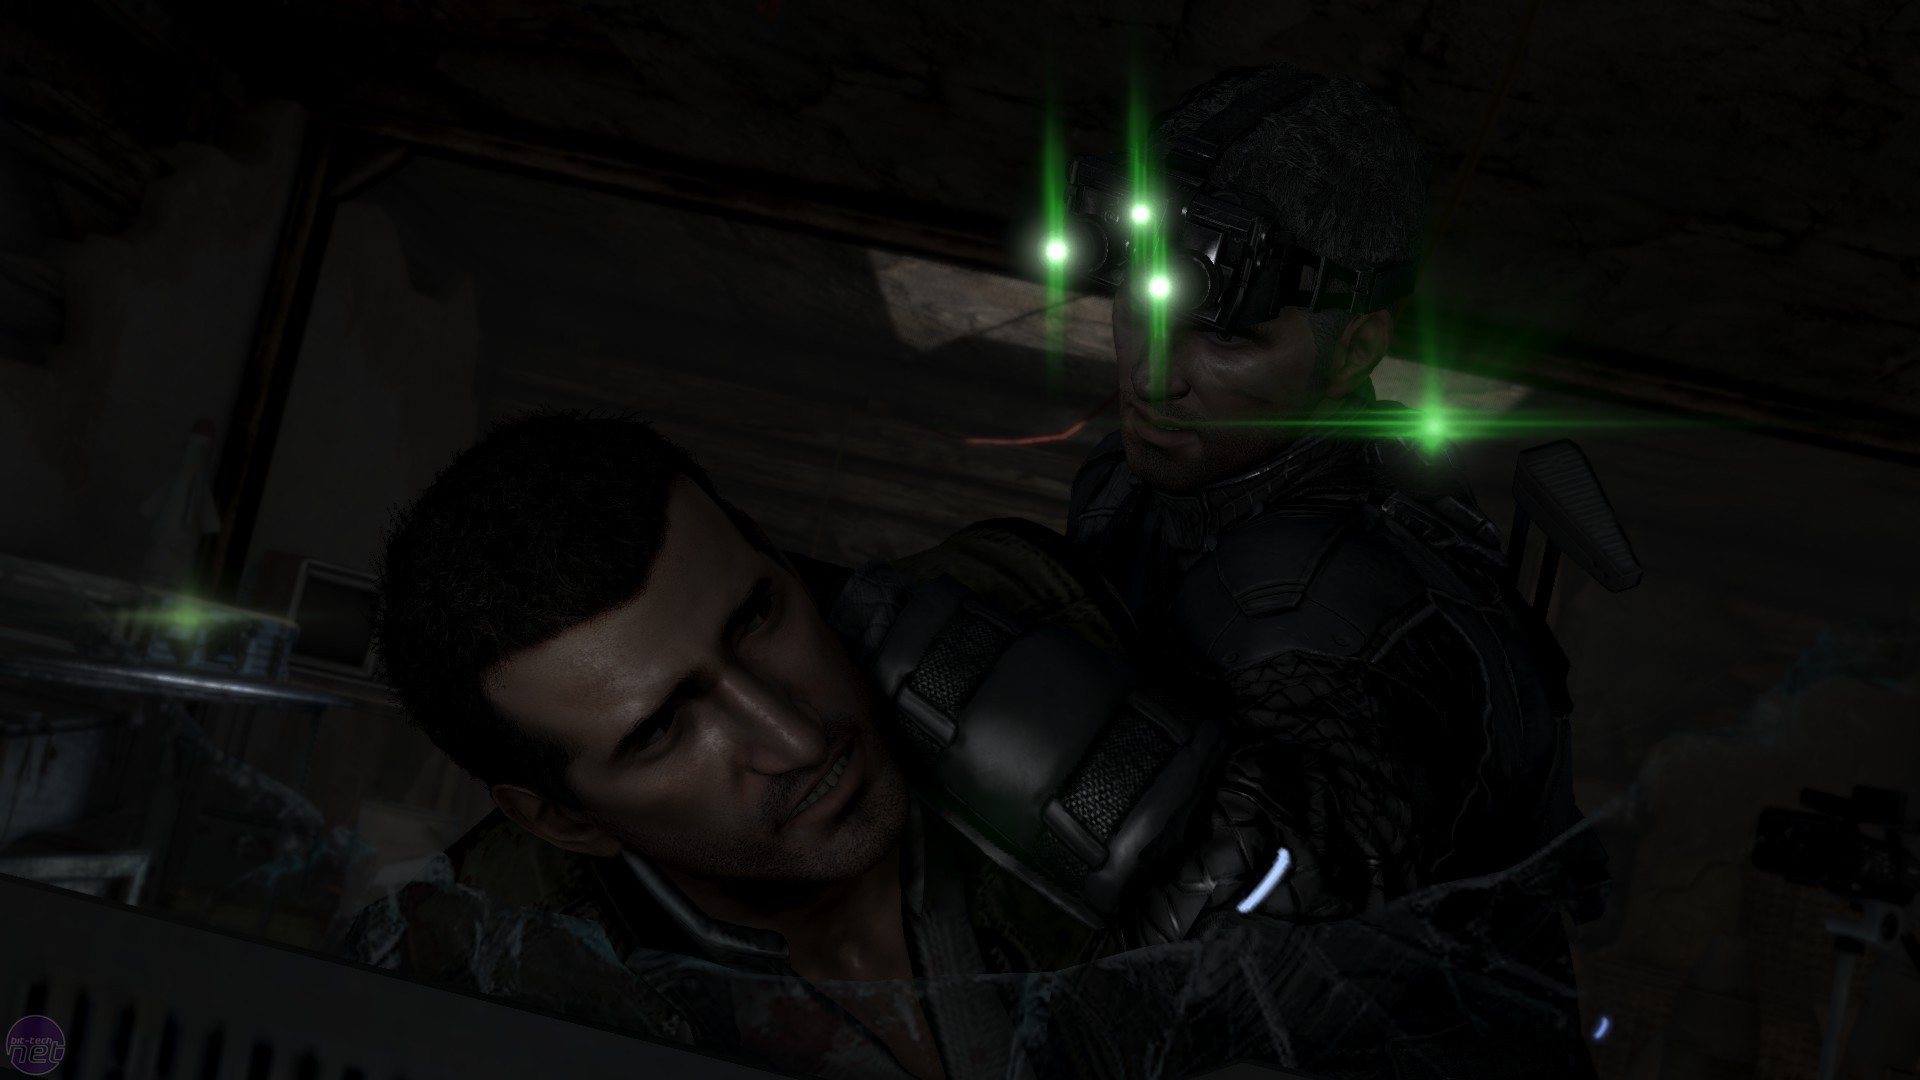 Splinter Cell: Blacklist Review - Ubisoft's Stealth Series Lights The Way  For Future Installments - Game Informer